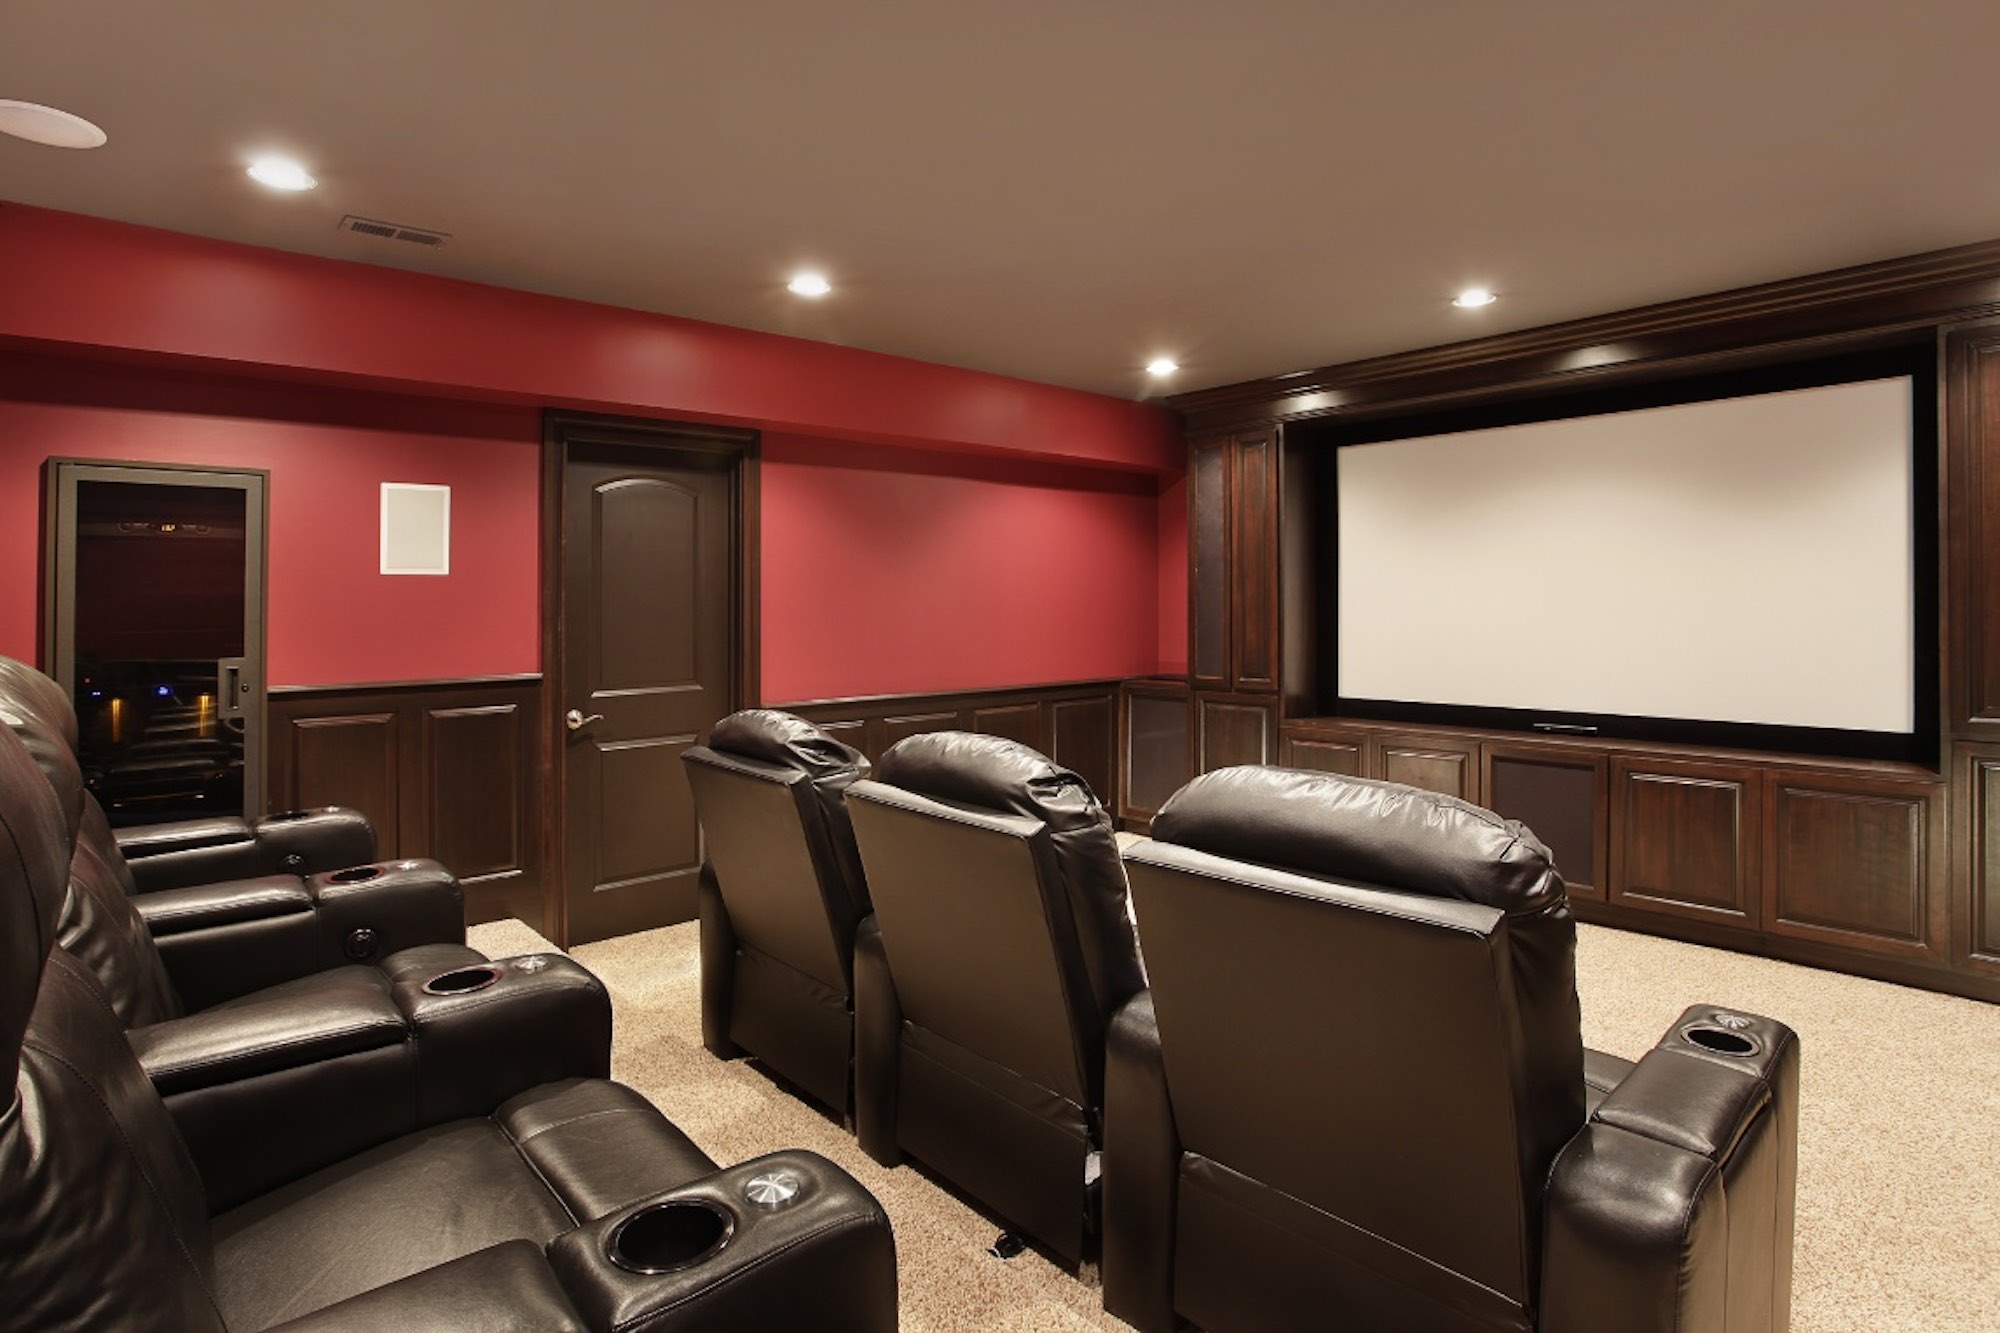 How to Build a Basement Home Theater- A Start-To-Finish Guide